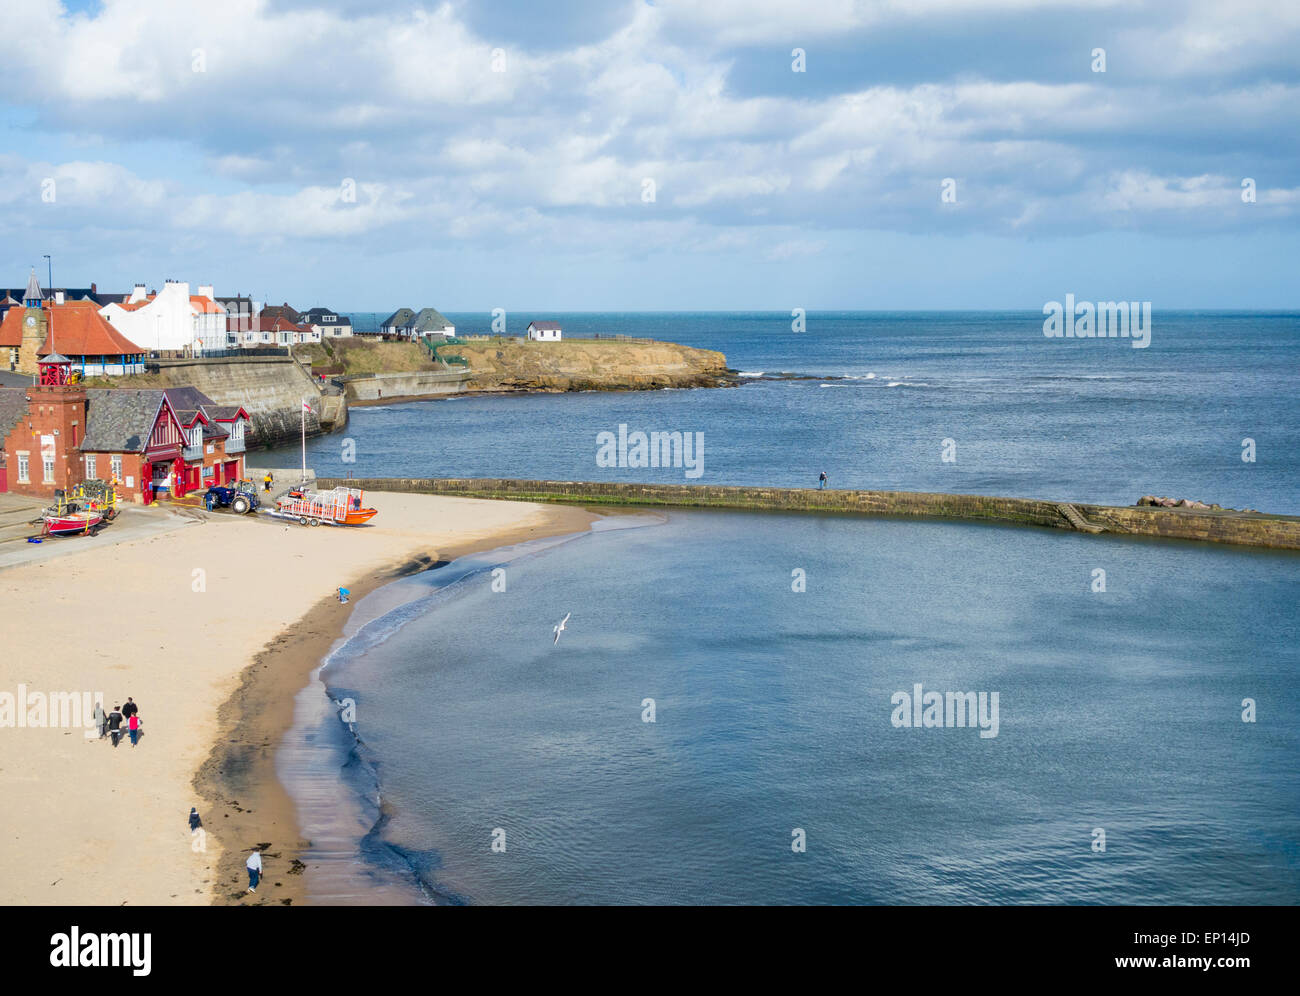 View over Cullercoats beach and RNLI Lifeboat station. Cullercoats, Tyne & Wear, north east England, UK Stock Photo